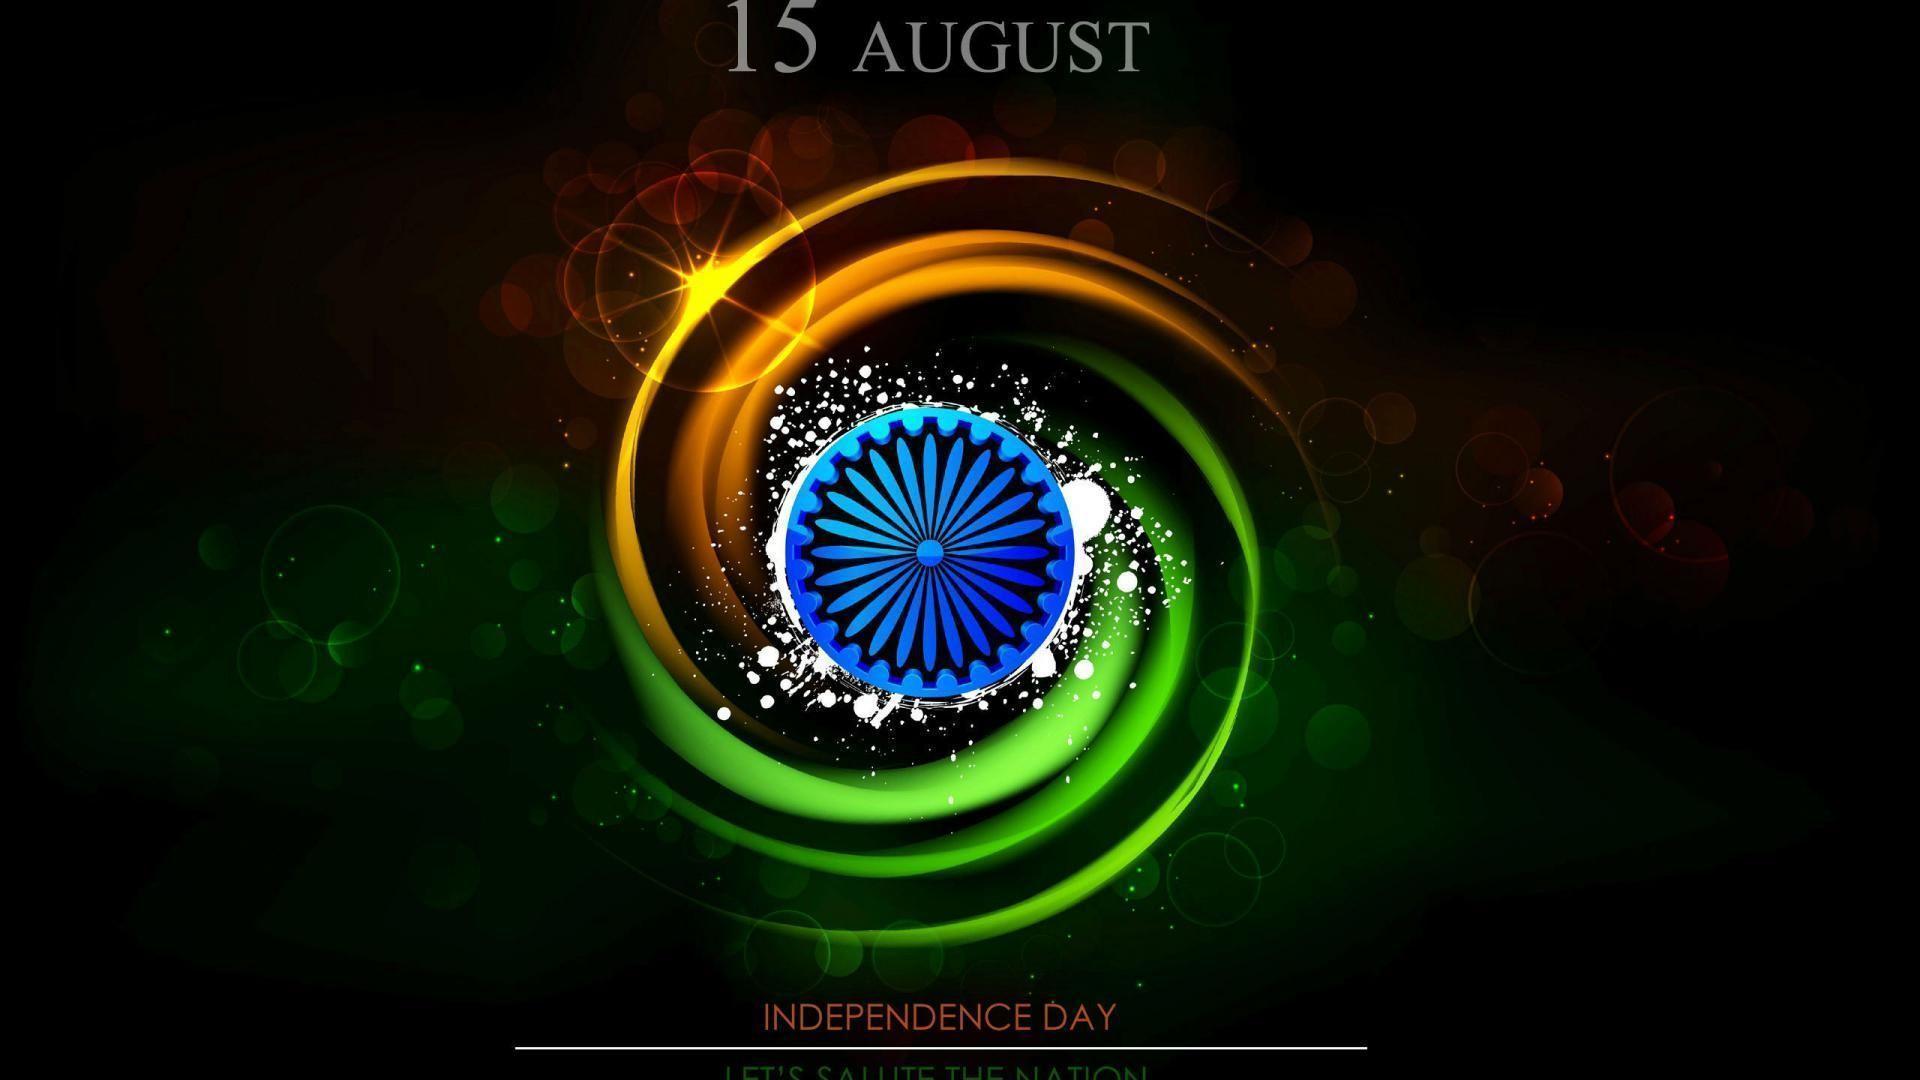 Indian Independence Day Image in 3D Design. HD Wallpaper for Free